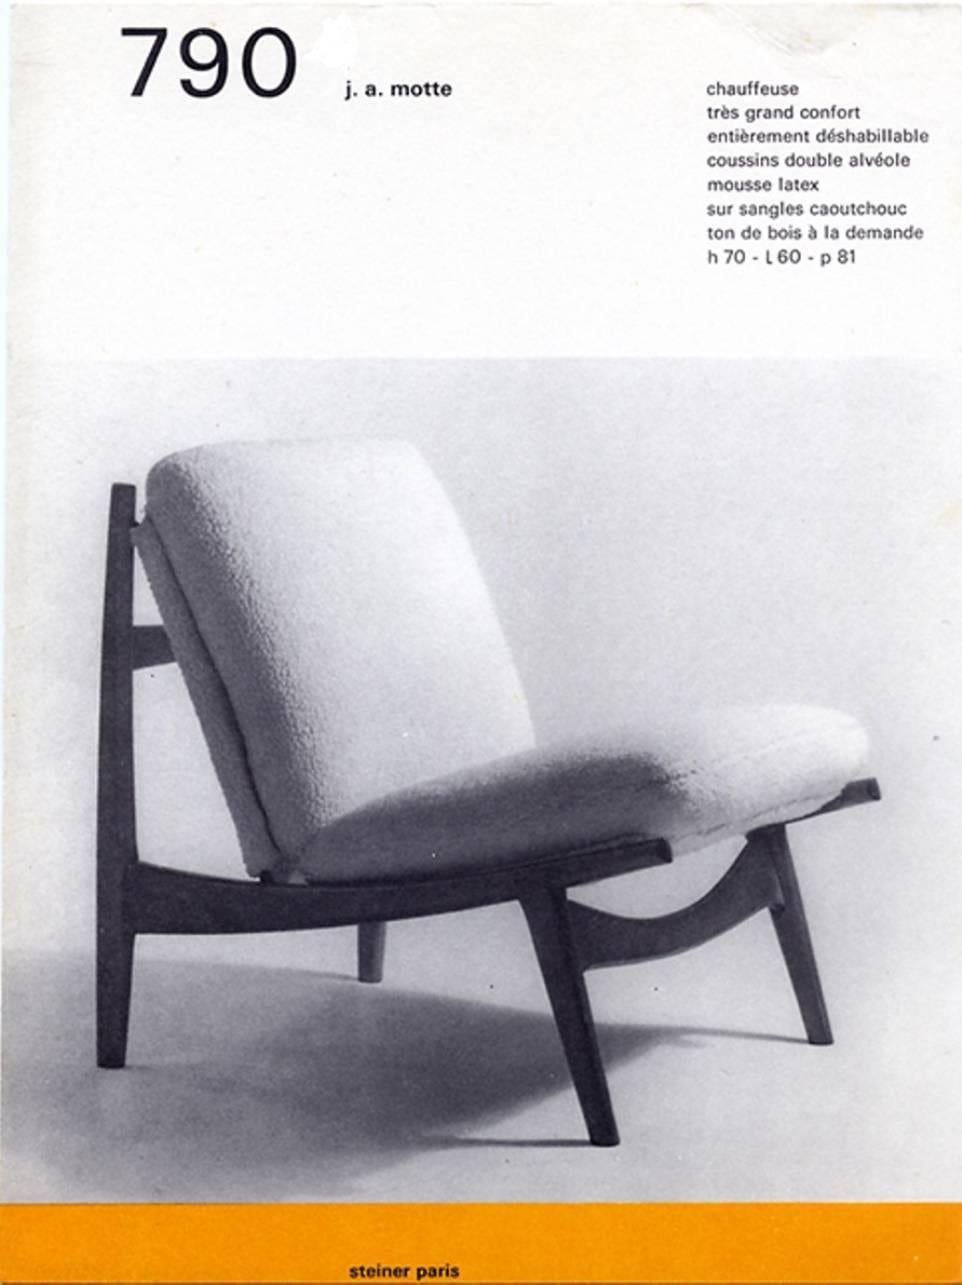 Beautiful, organic form, model '790' lounge chair designed by Joseph Andre Motte (1925-2013) for Steiner, France in 1960. 

This chair has been functionally restored salvaging the original rare old wool upholstery as used by Steiner

We